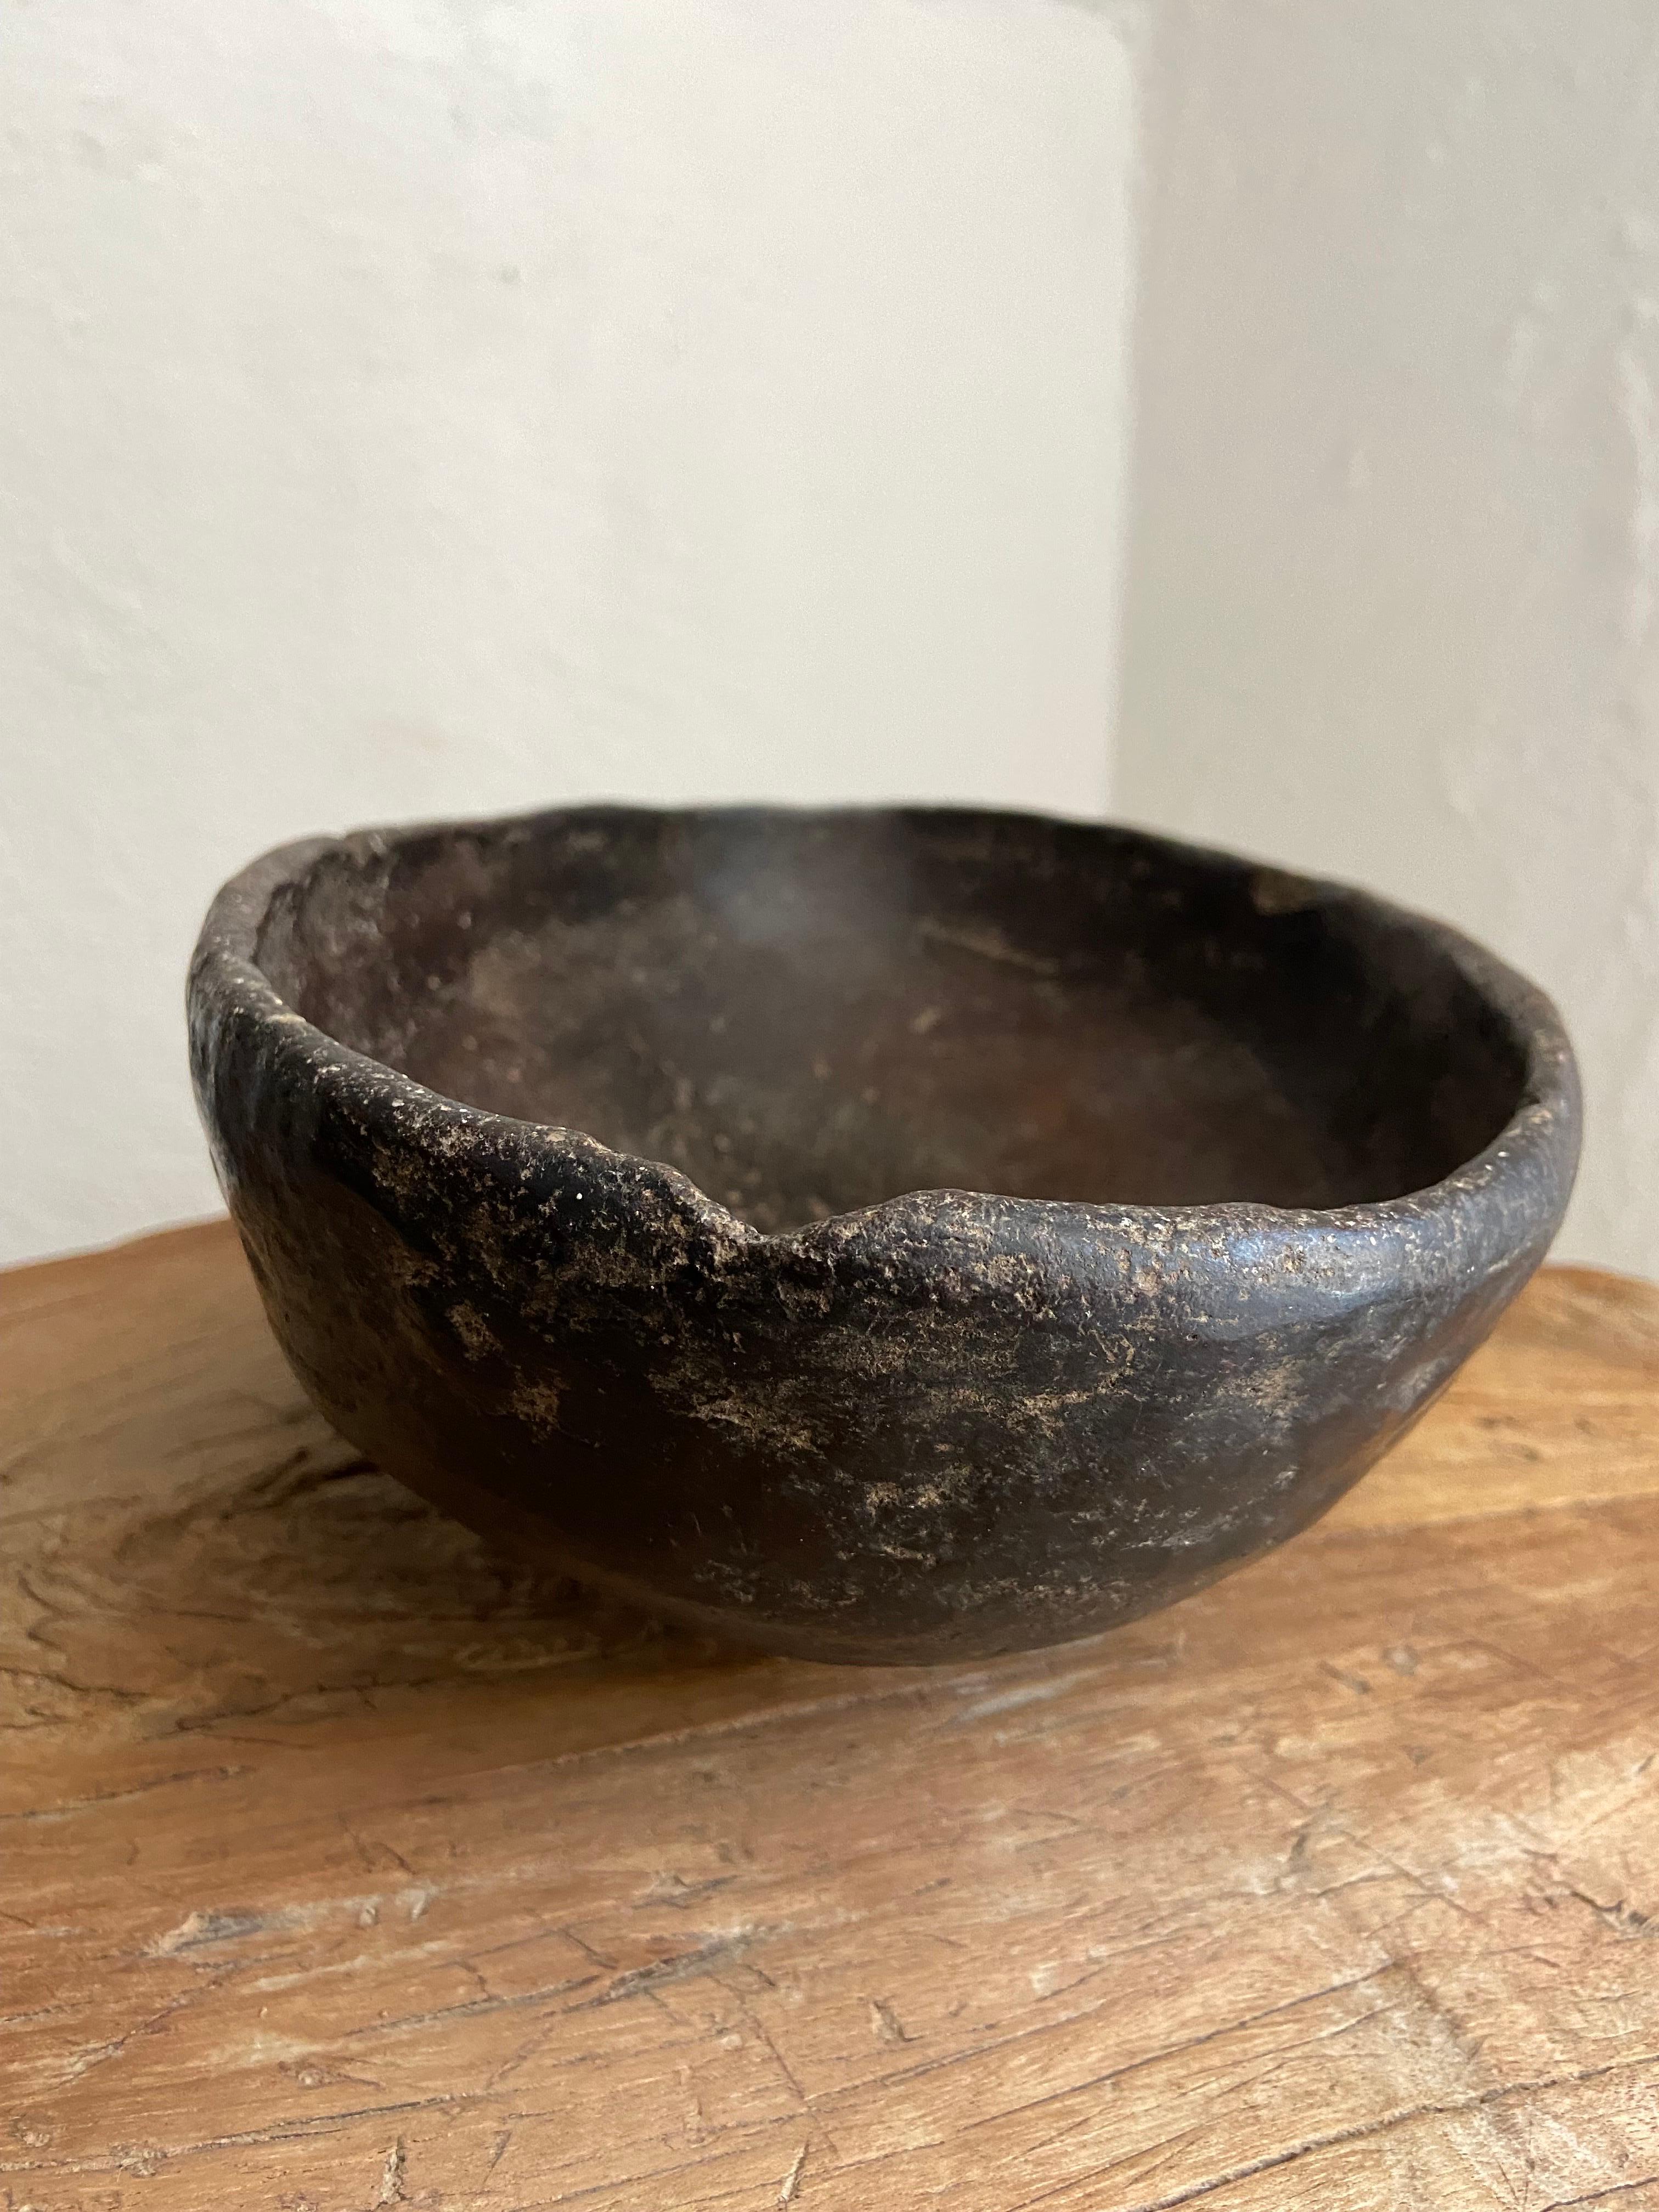 Mexican Primitive Styled Ceramic Bowl From The Mixteca Region of Oaxaca, Mexico